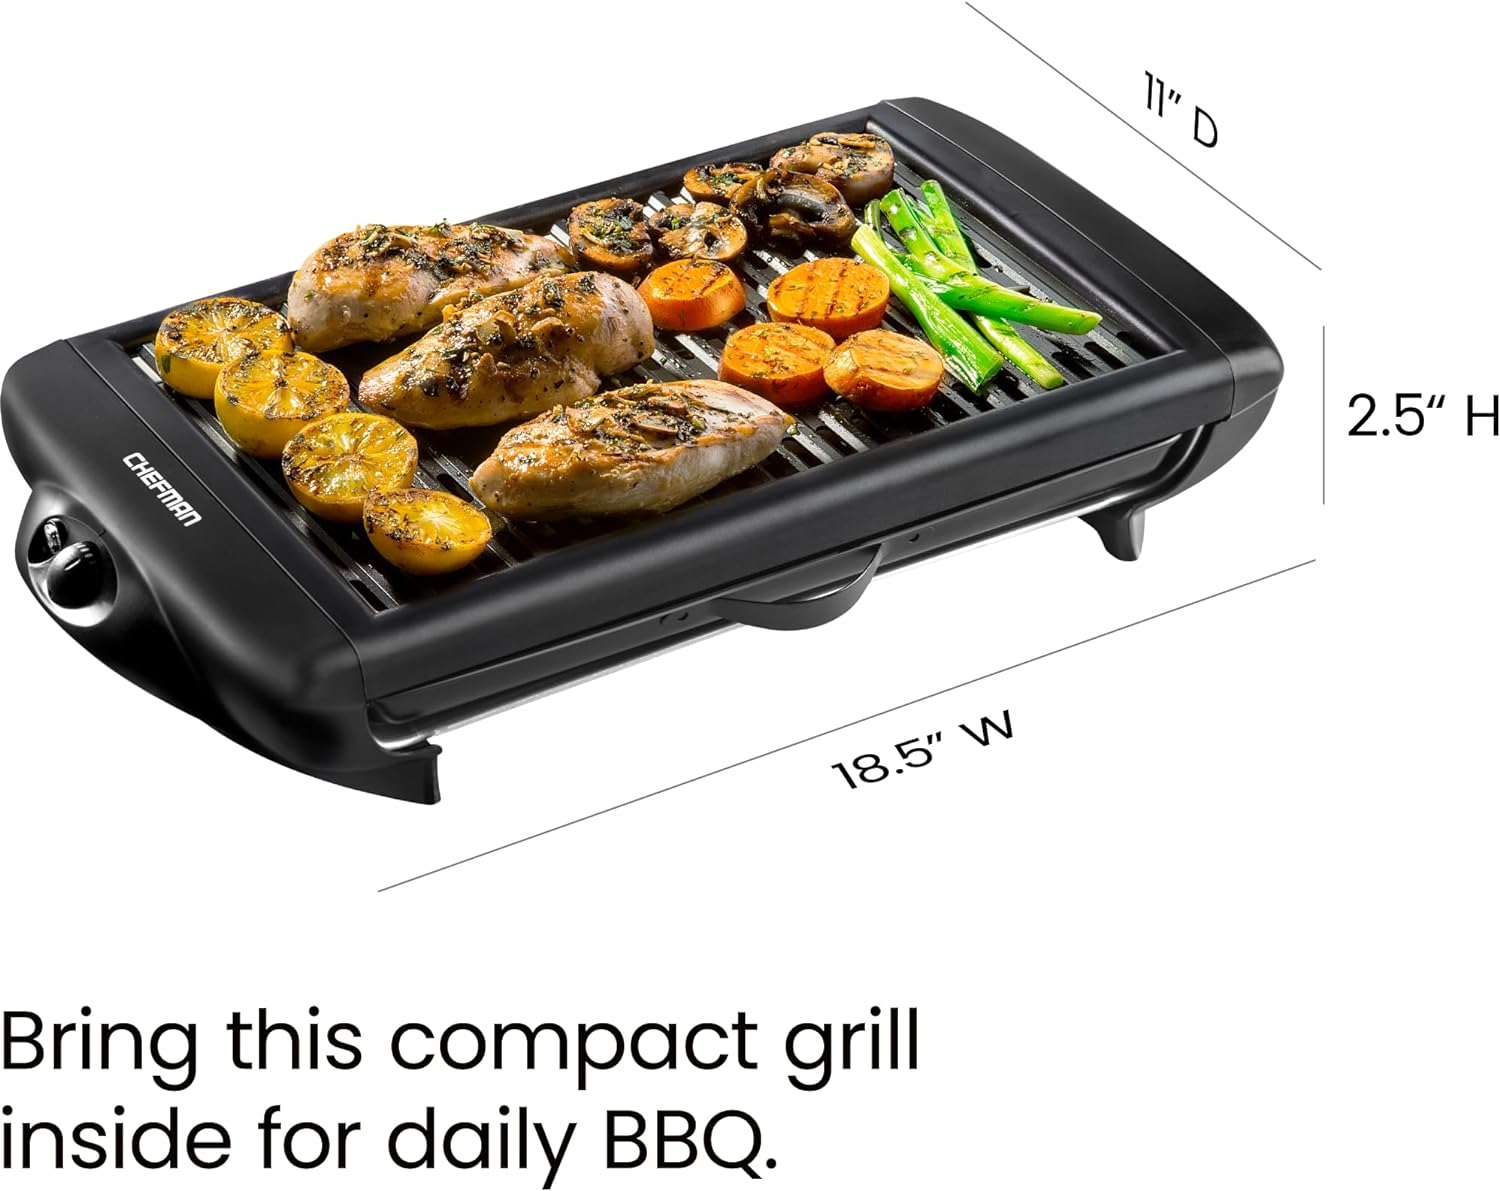 Chefman Electric Smokeless Indoor Grill w/Non-Stick Cooking Surface  Adjustable Temperature Knob from Warm to Sear for Customized BBQing, Dishwasher Safe Removable Water Tray, Black